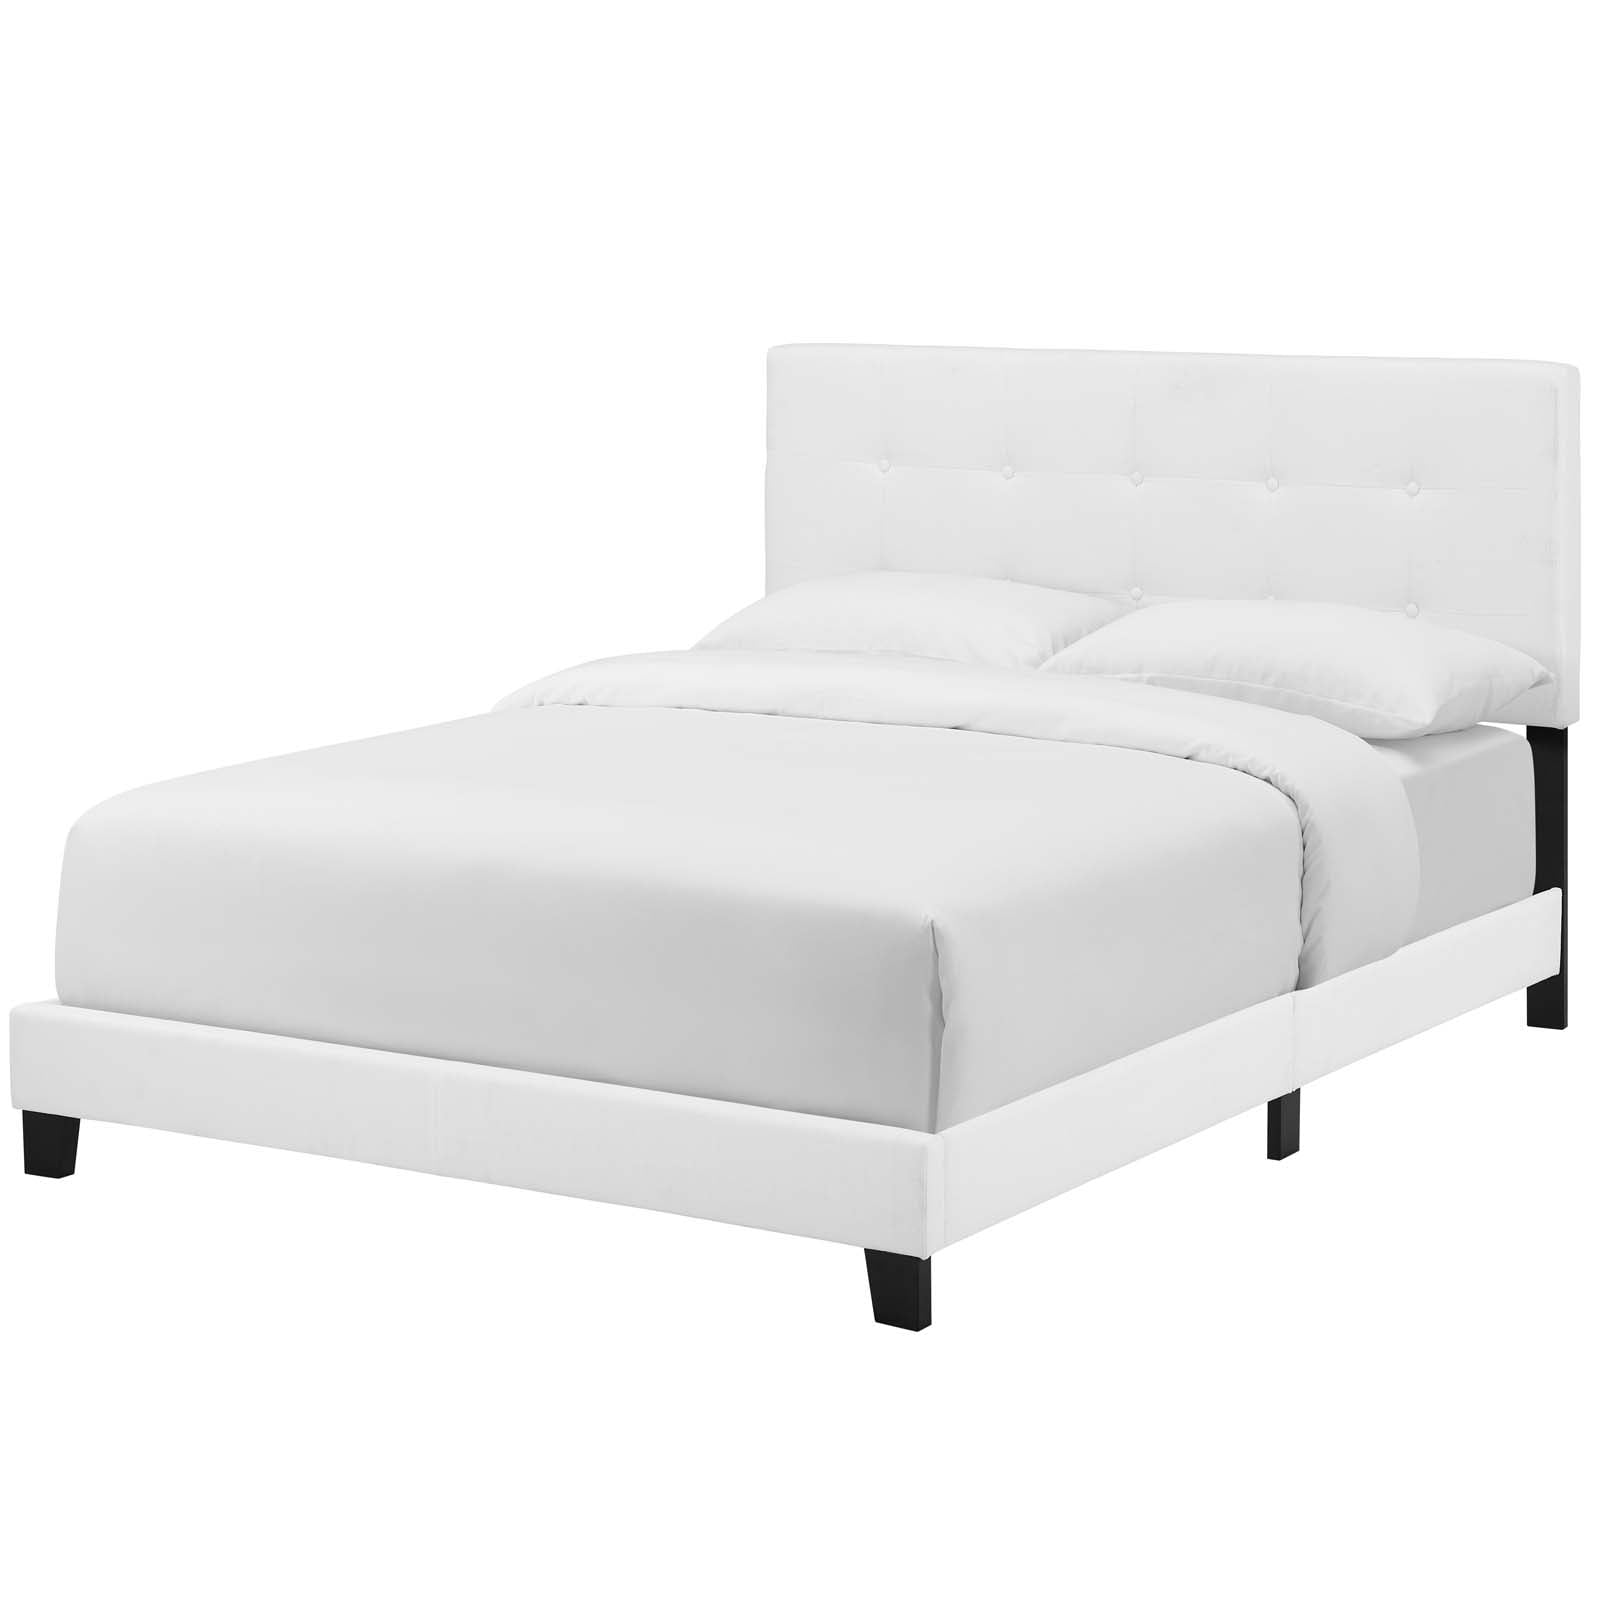 Modern Contemporary Urban Design Bedroom King Size Bed Frame, Fabric